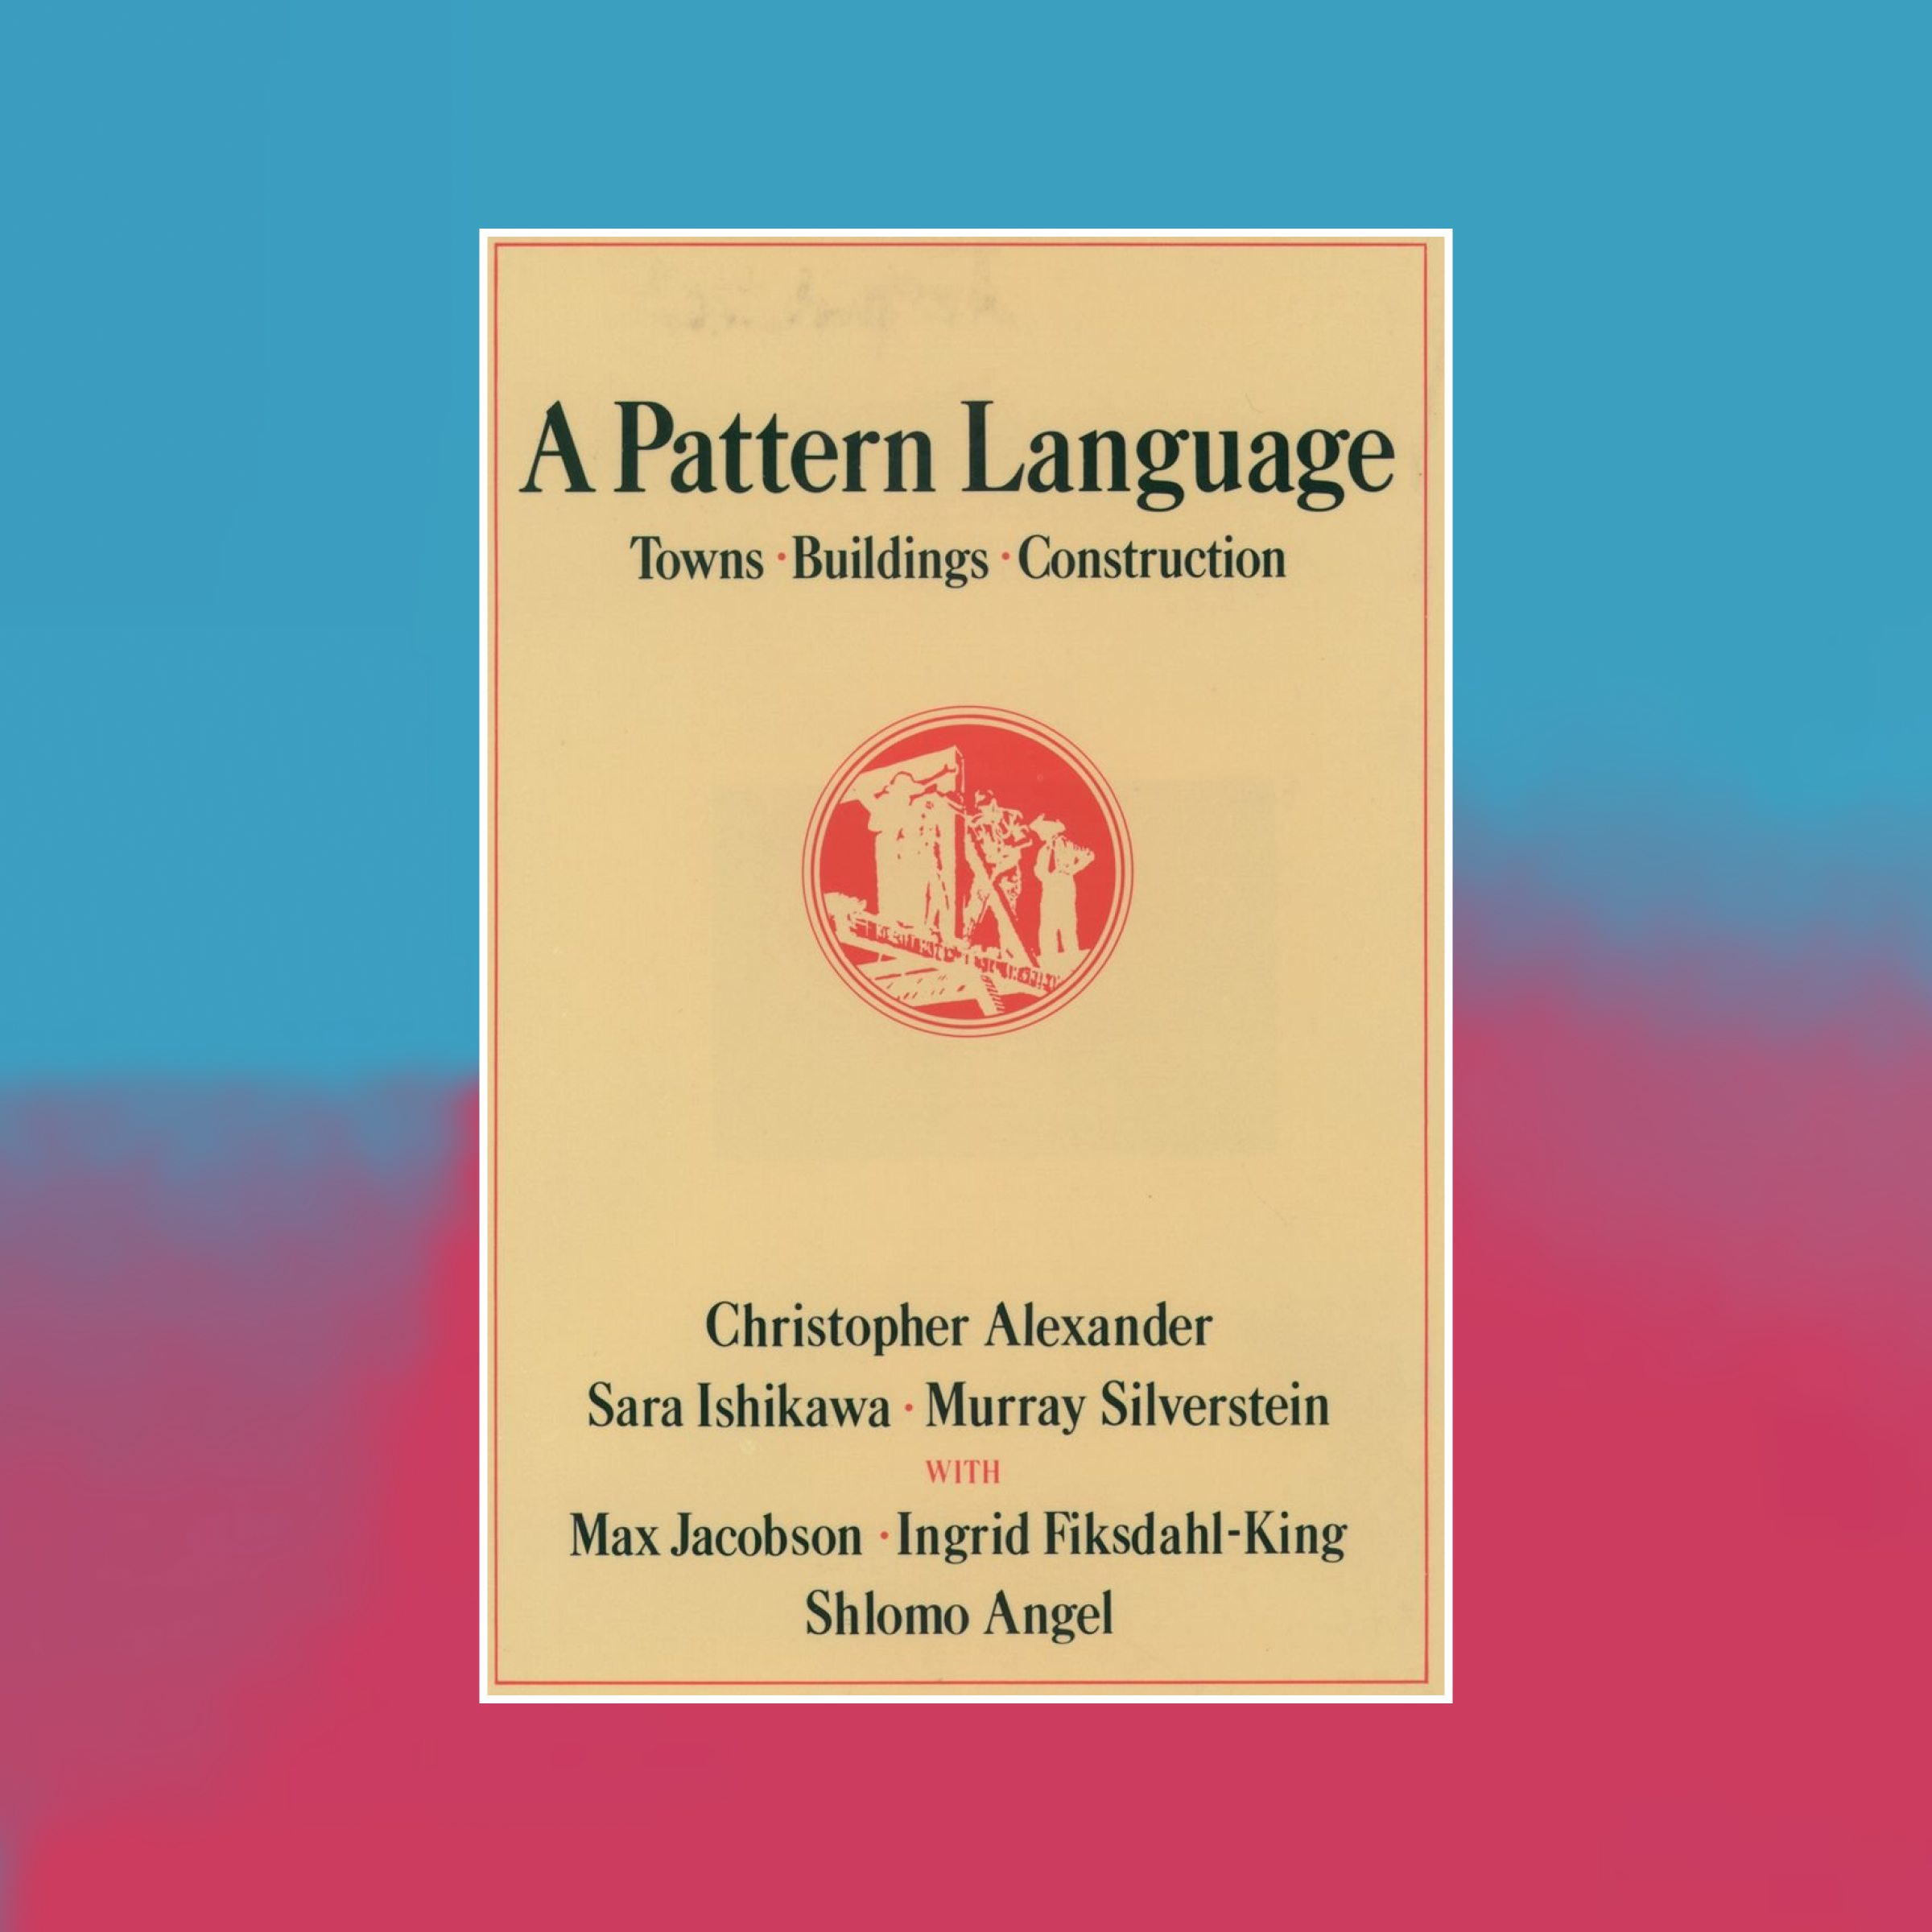 Book cover of A Pattern Language against an abstract painted background